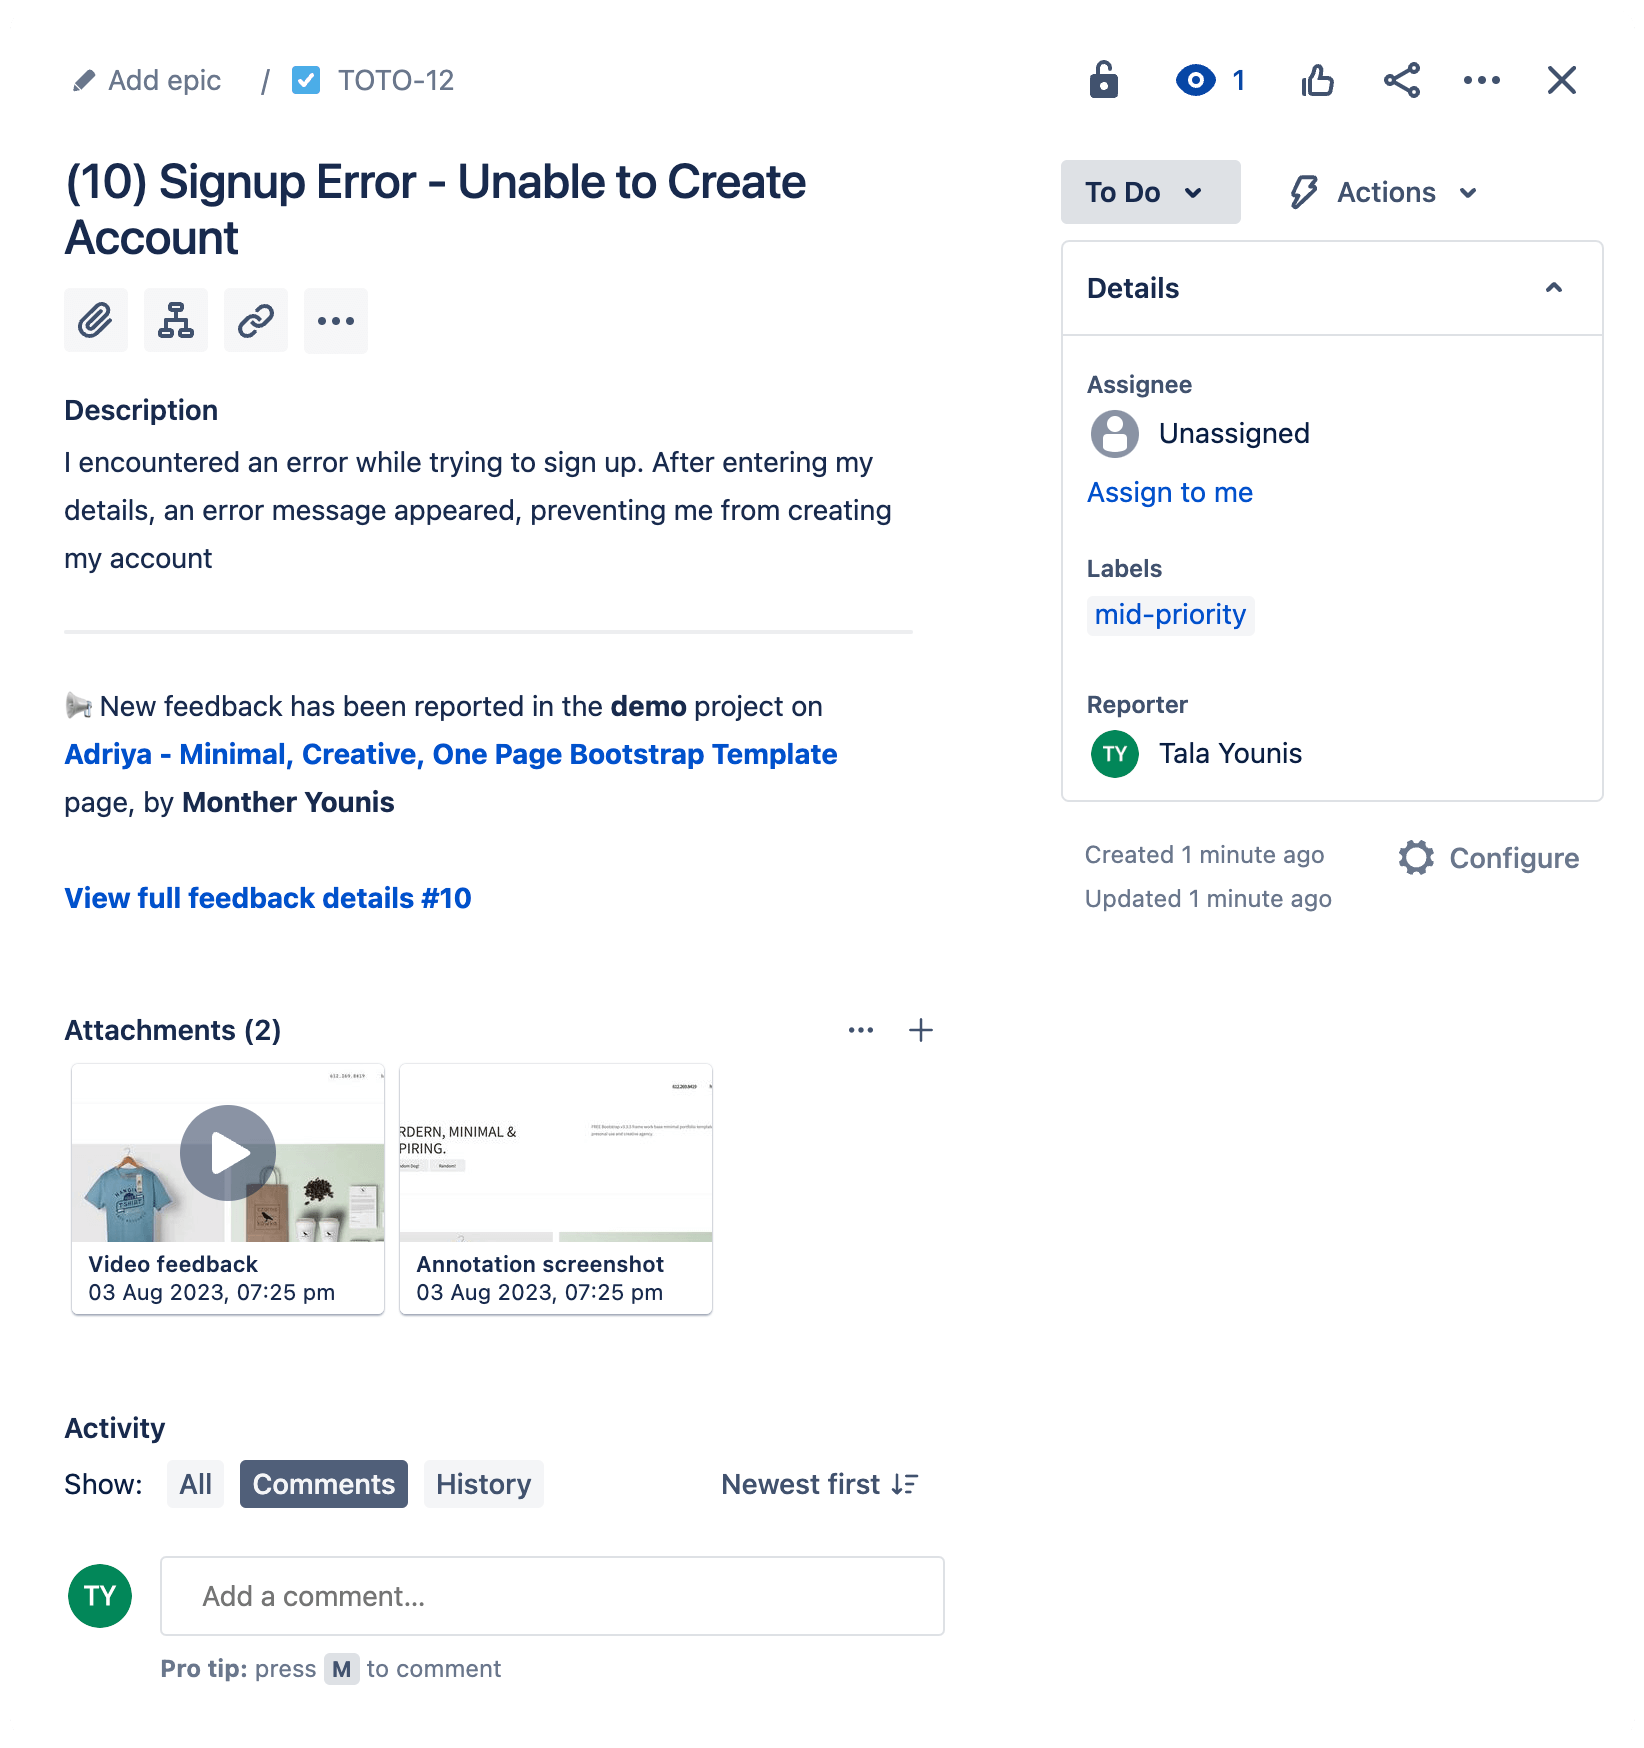 Bug reported by klynd on Jira with an annotated screenshot and video attached with more feedback details